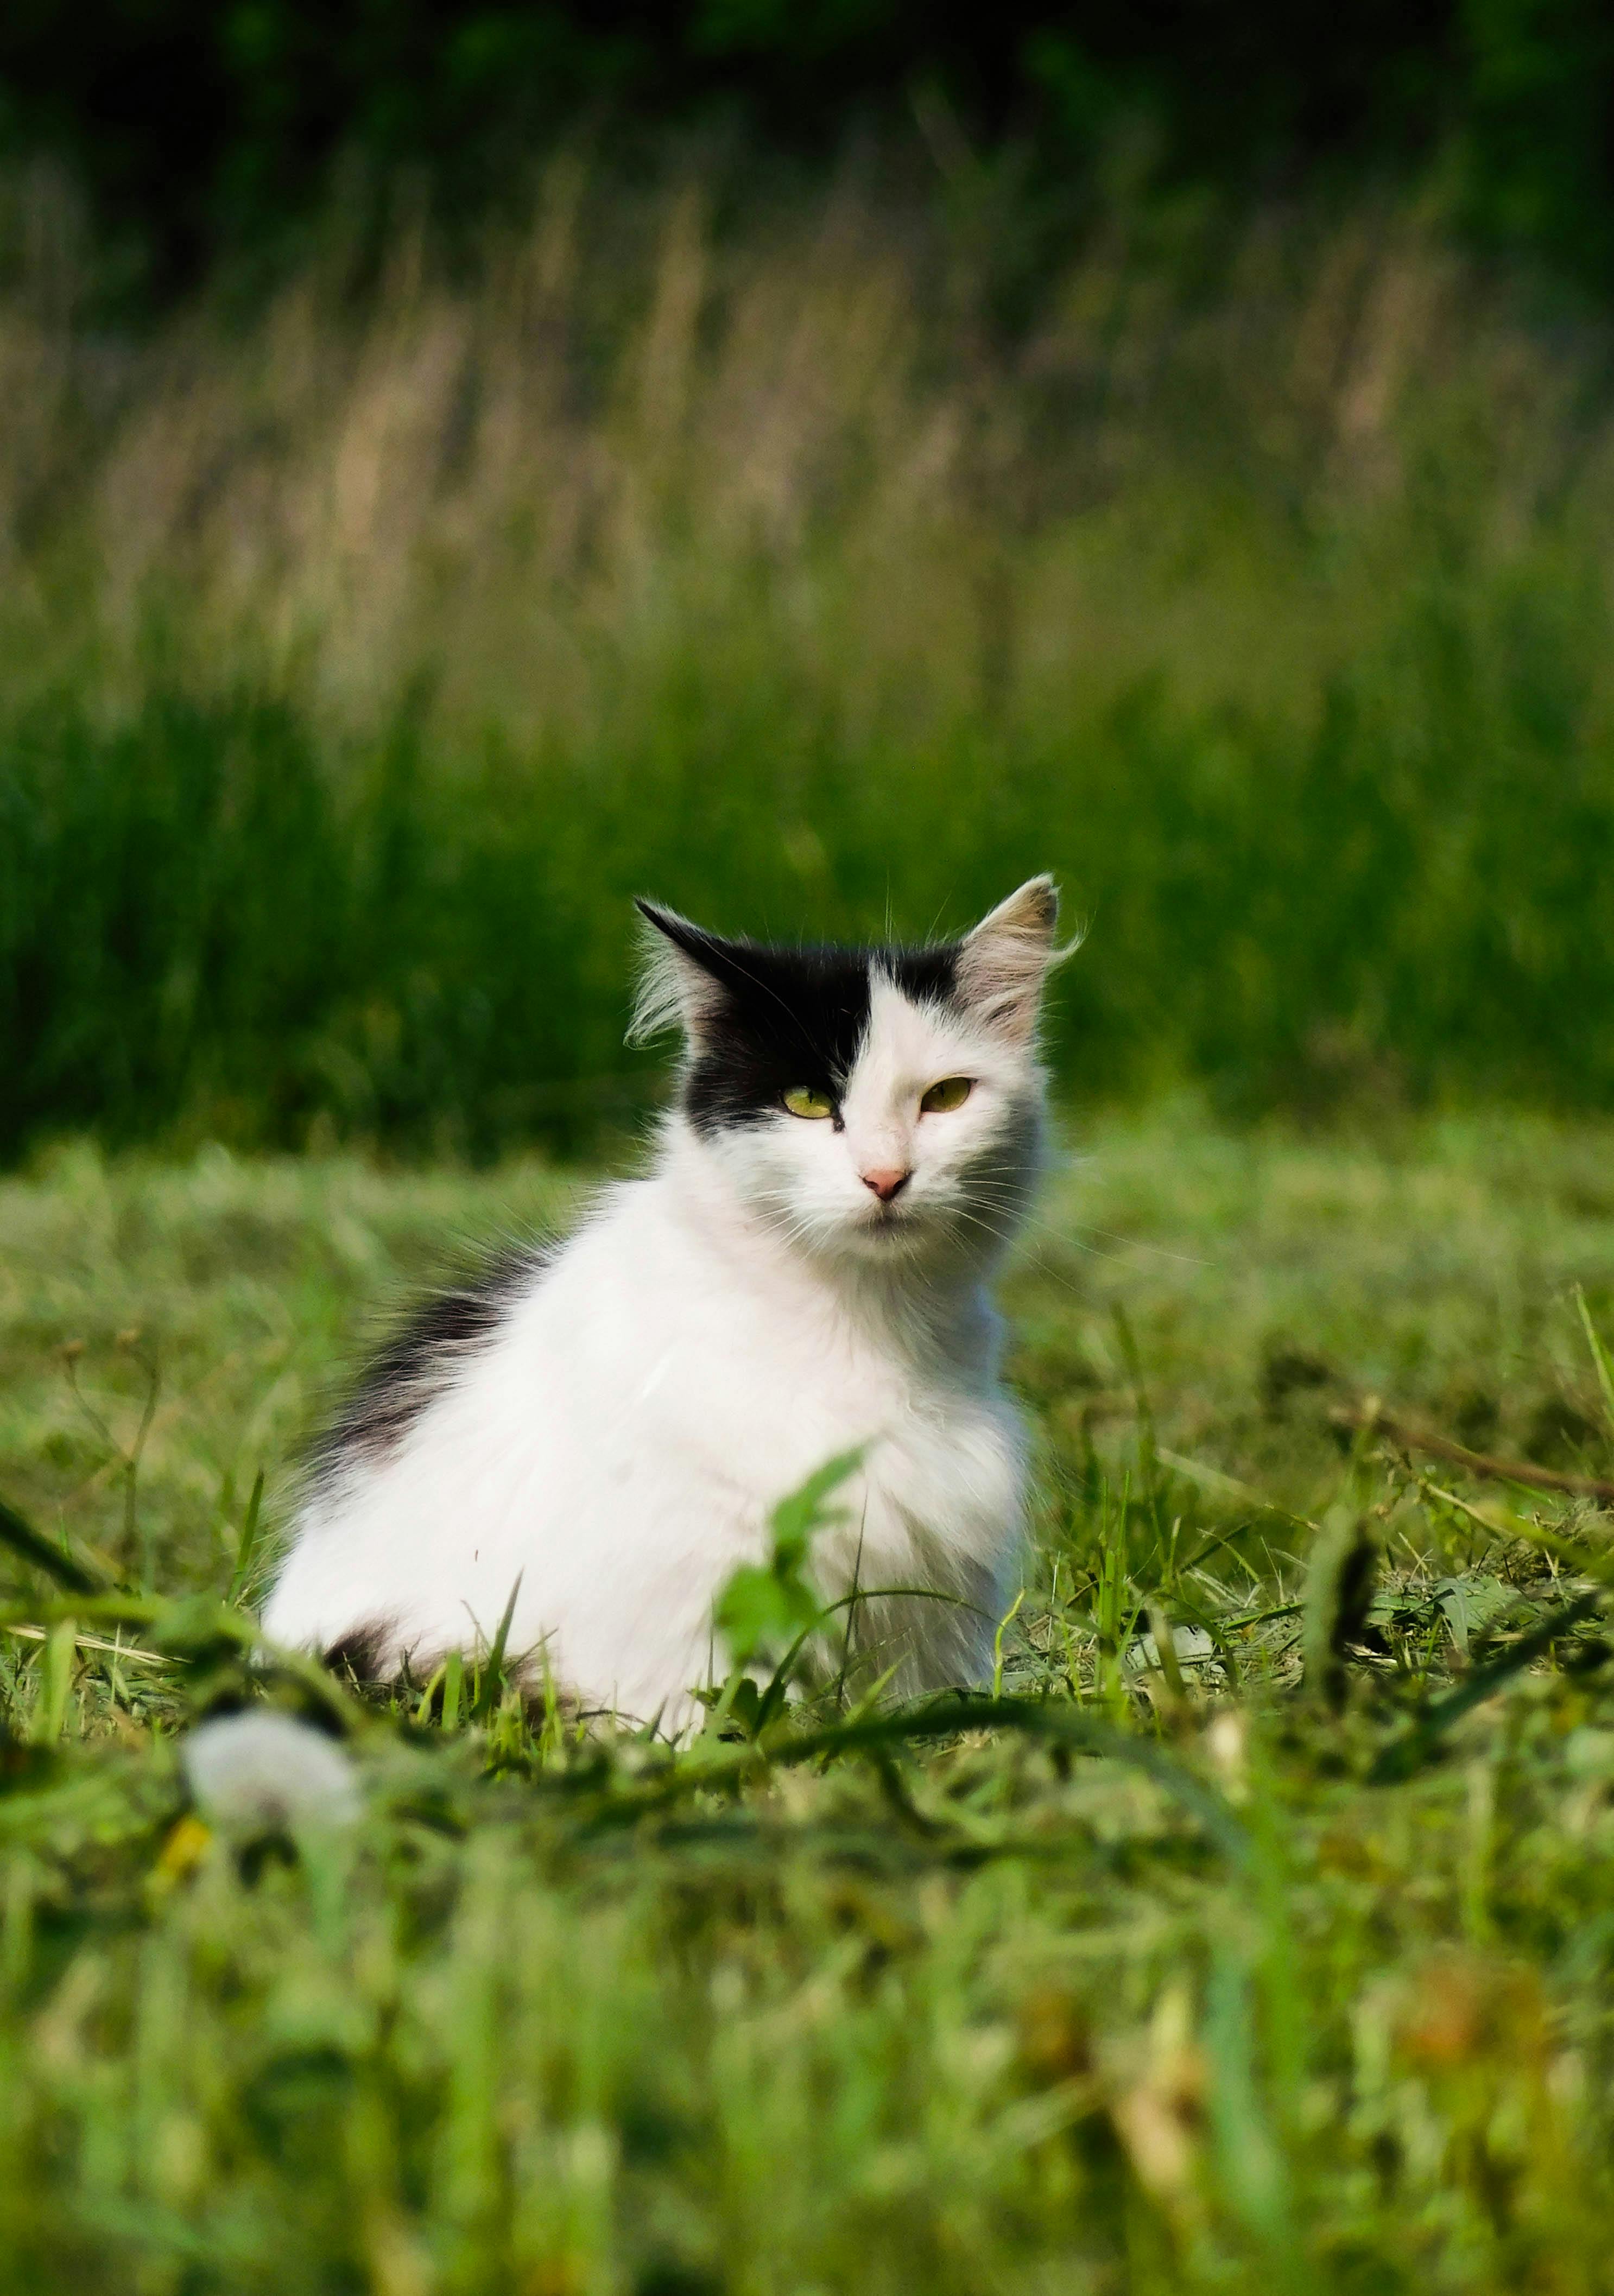 Free stock photo of cat, Cat and field, field